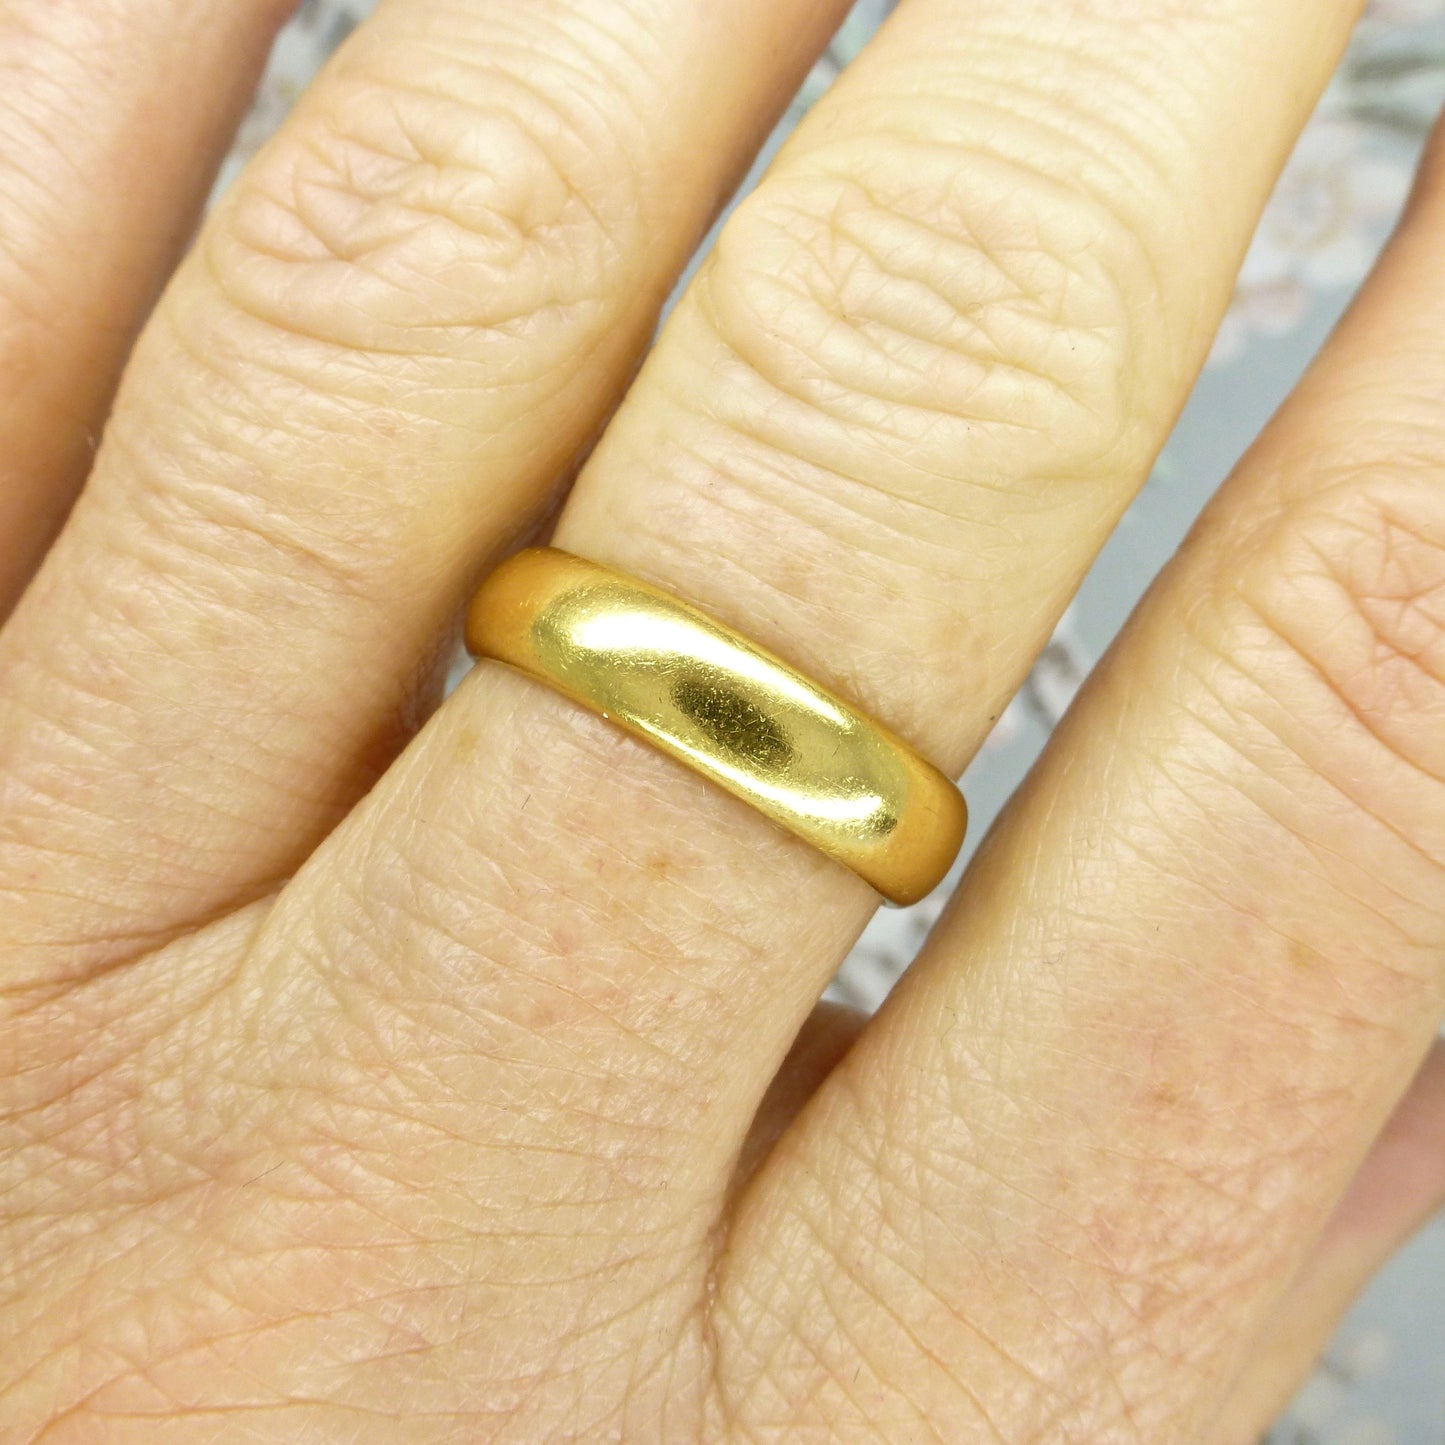 Vintage English 22ct gold wedding band dated 1968 ~ Heavy yellow gold stacking ring 6.35 grams